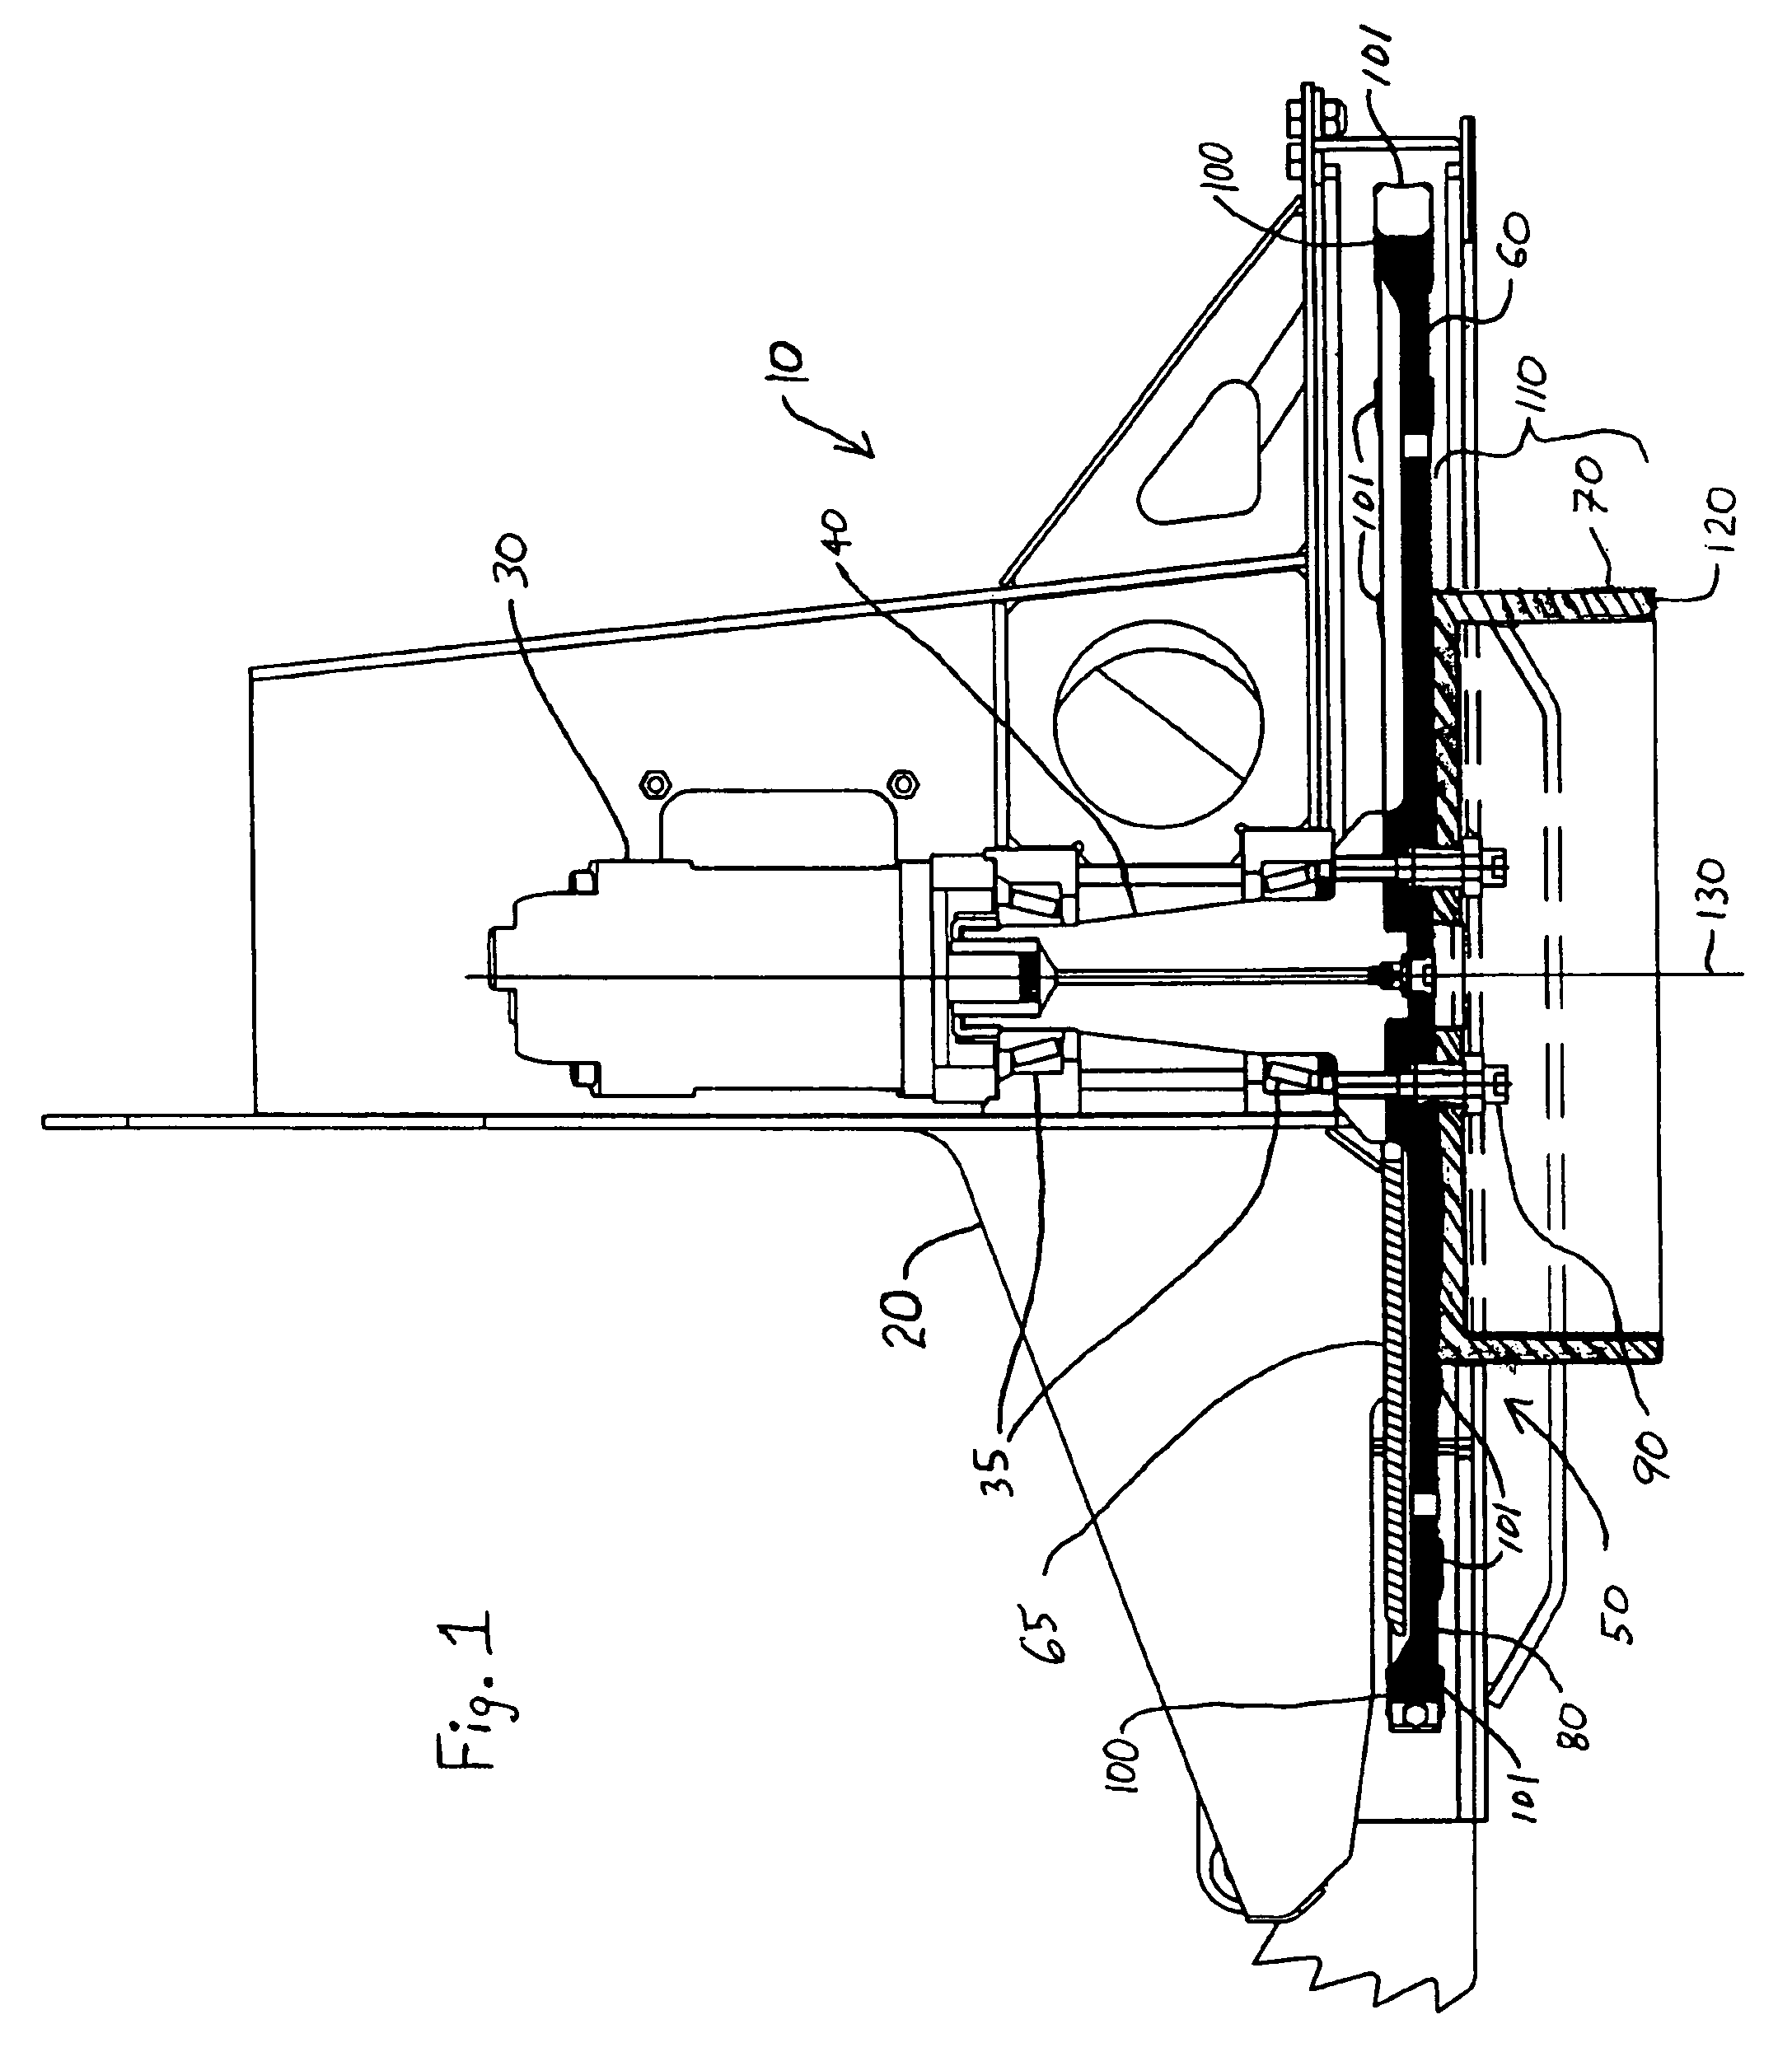 Apparatus and method for severing a tree and reducing the tree stump